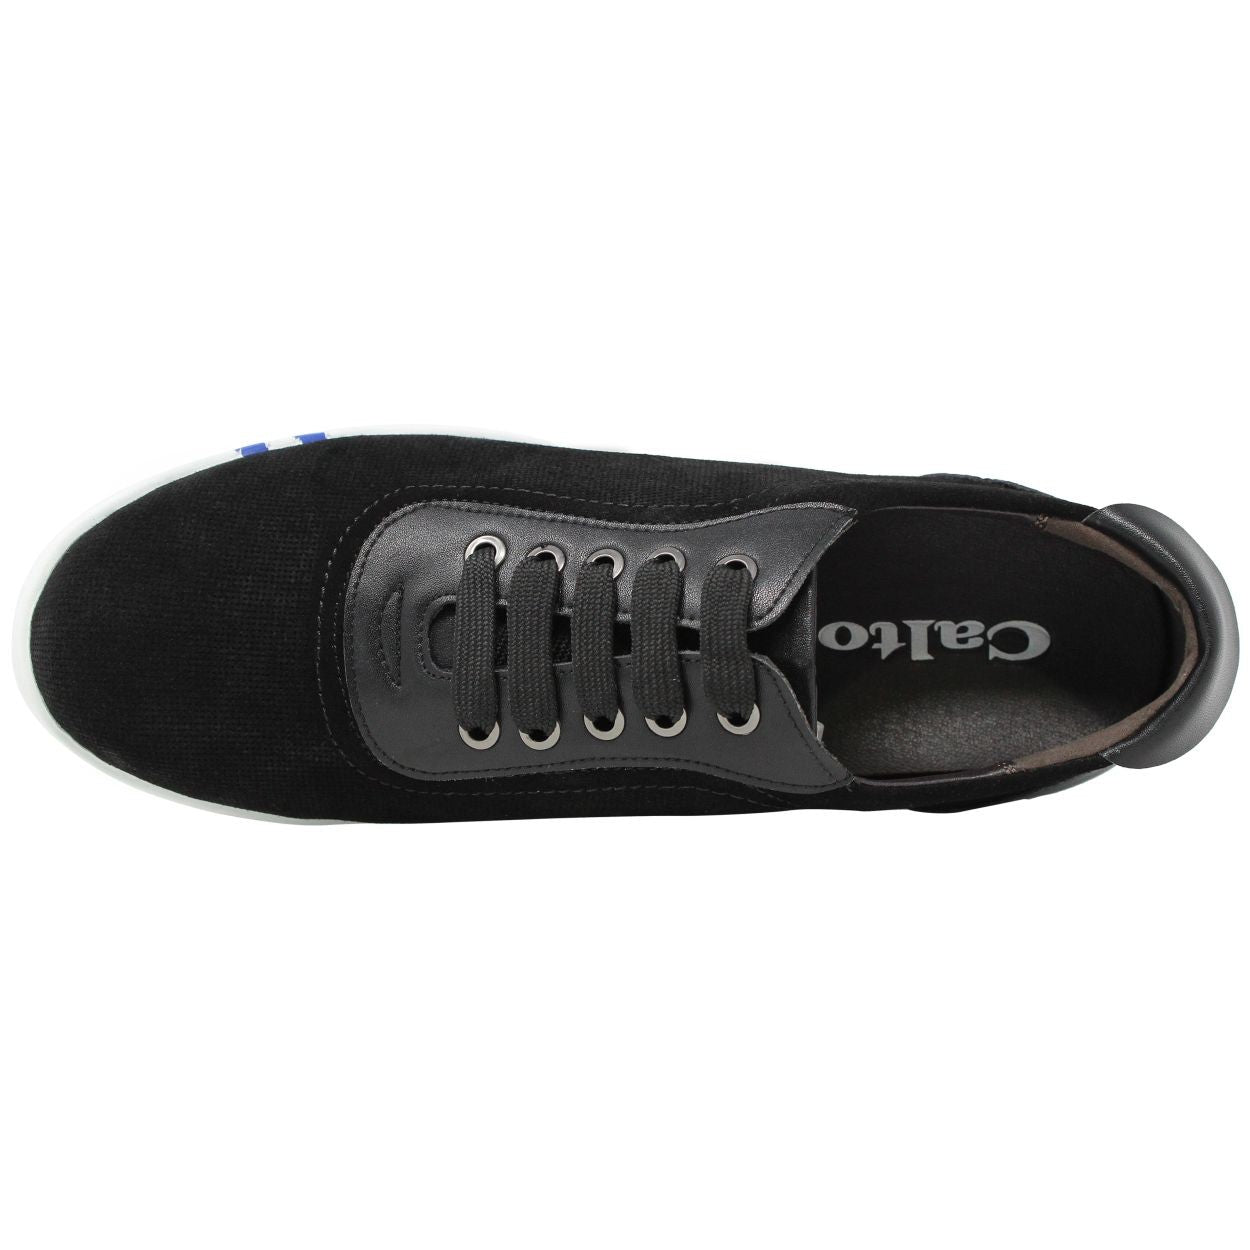 Elevator shoes height increase CALTO - Y90711 - 2.8 Inches Taller (Black)